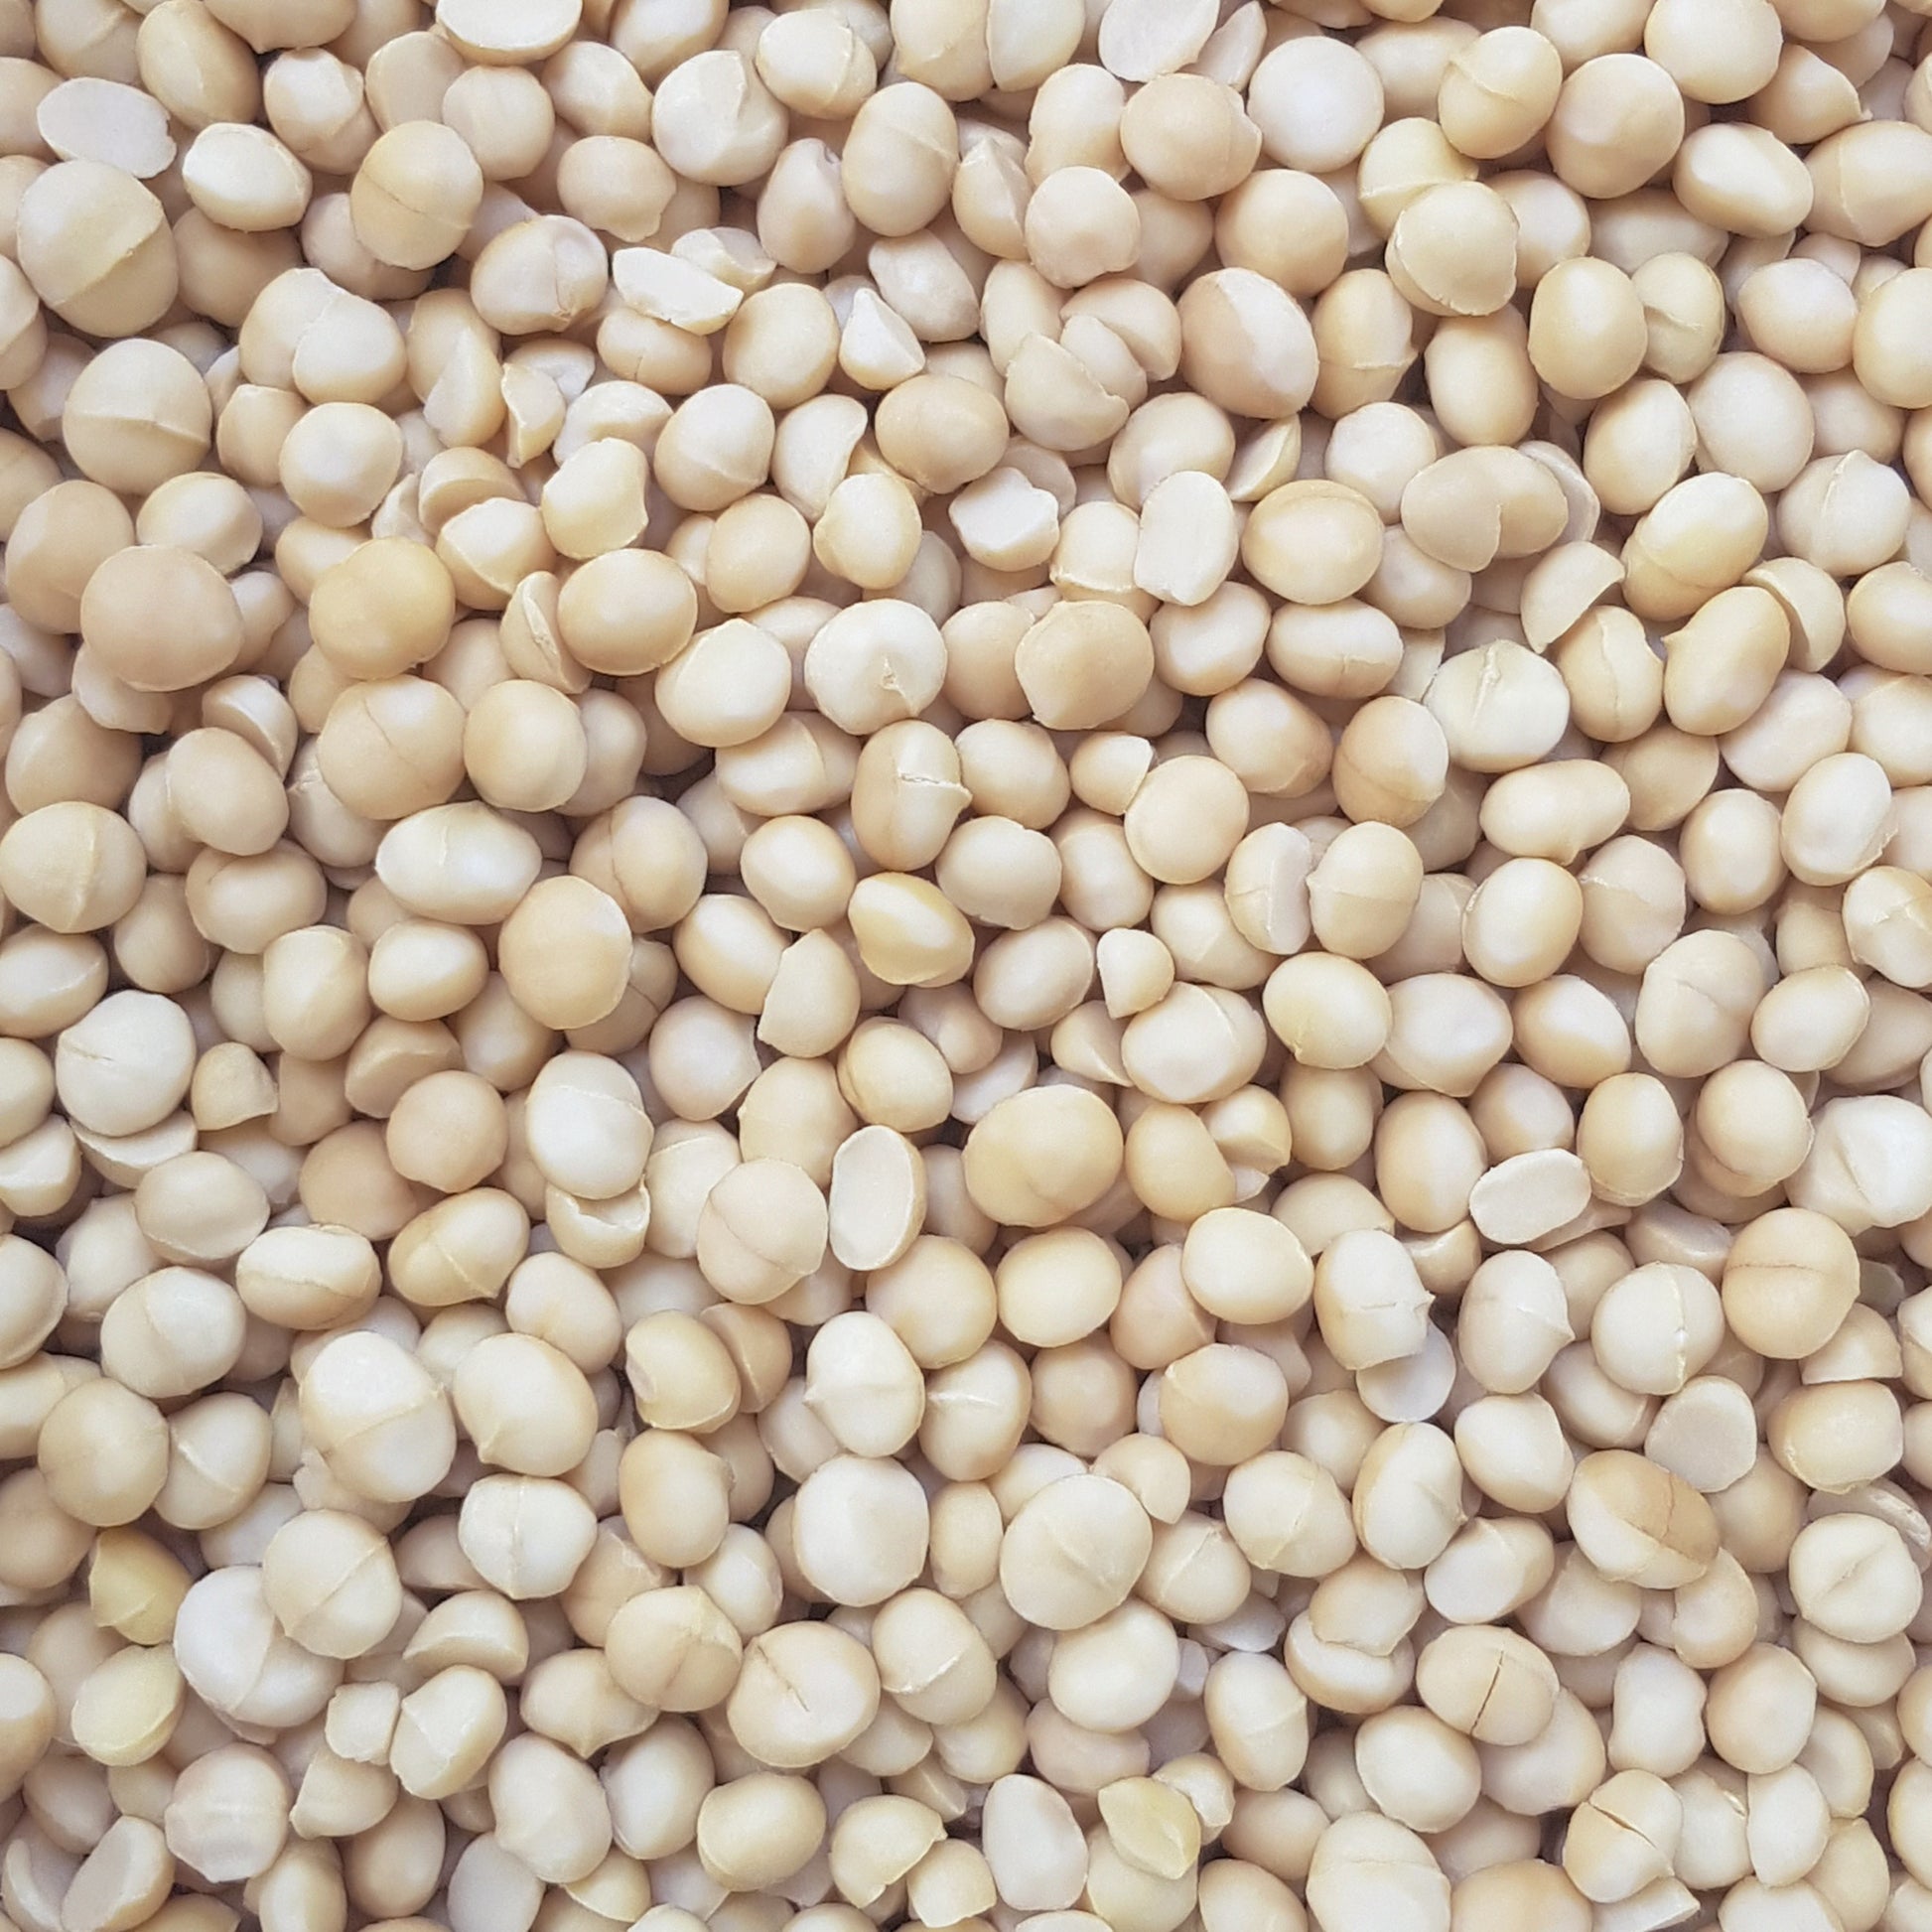 Full frame overhead image of BY NATURE Macadamia Nuts - certified organic at source, raw.